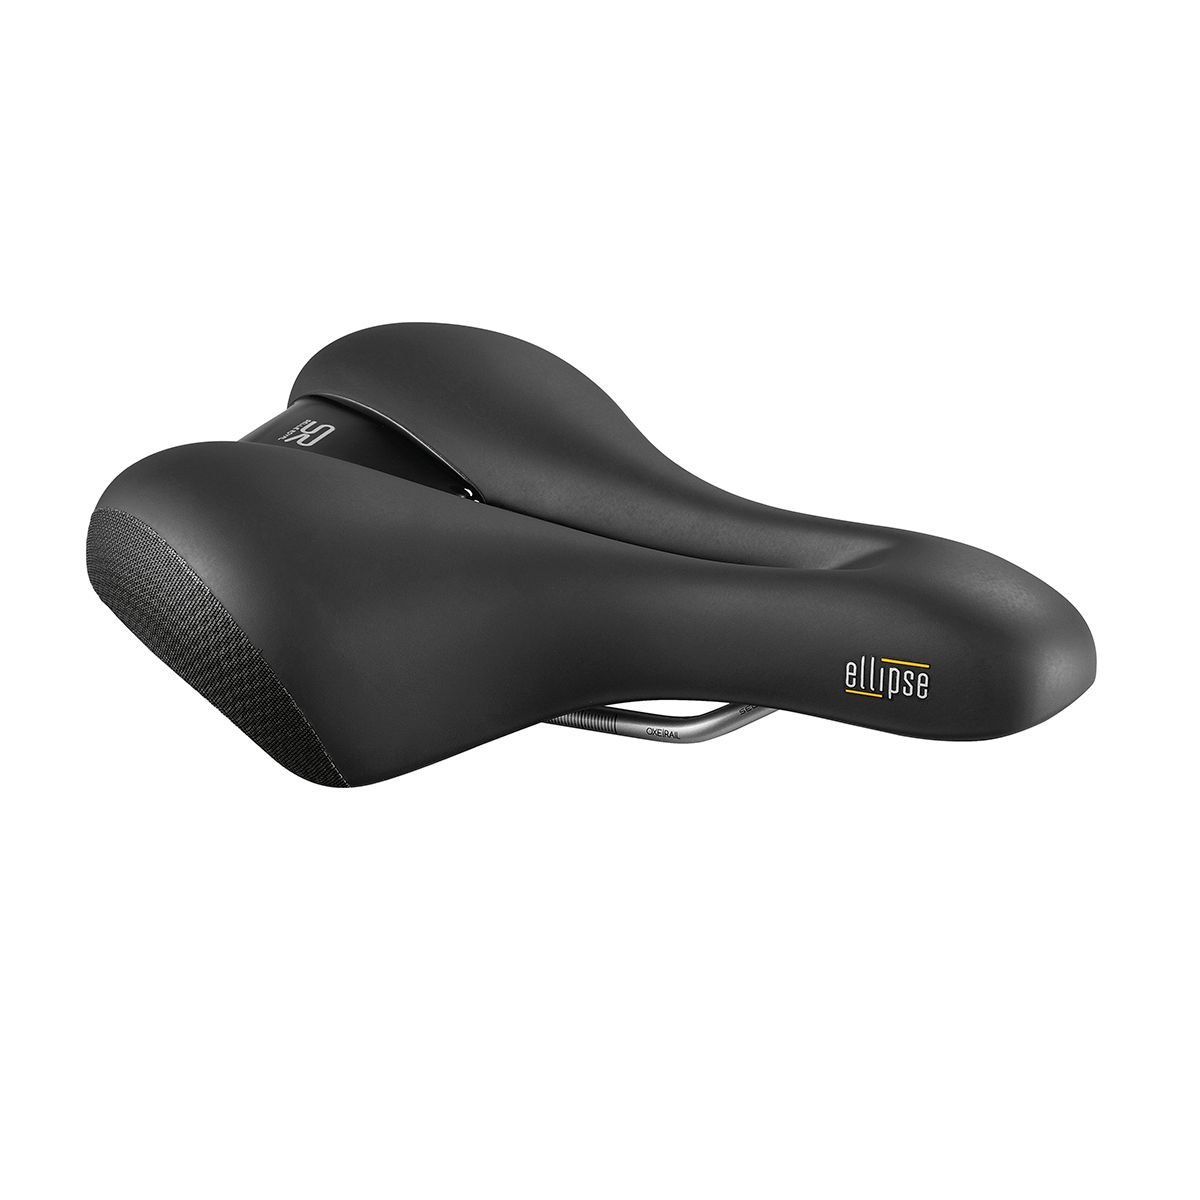 Седло Selle Royal Ellipse Moderate, женское, 51B6DE0A09321 седло selle royal lookin moderate жен